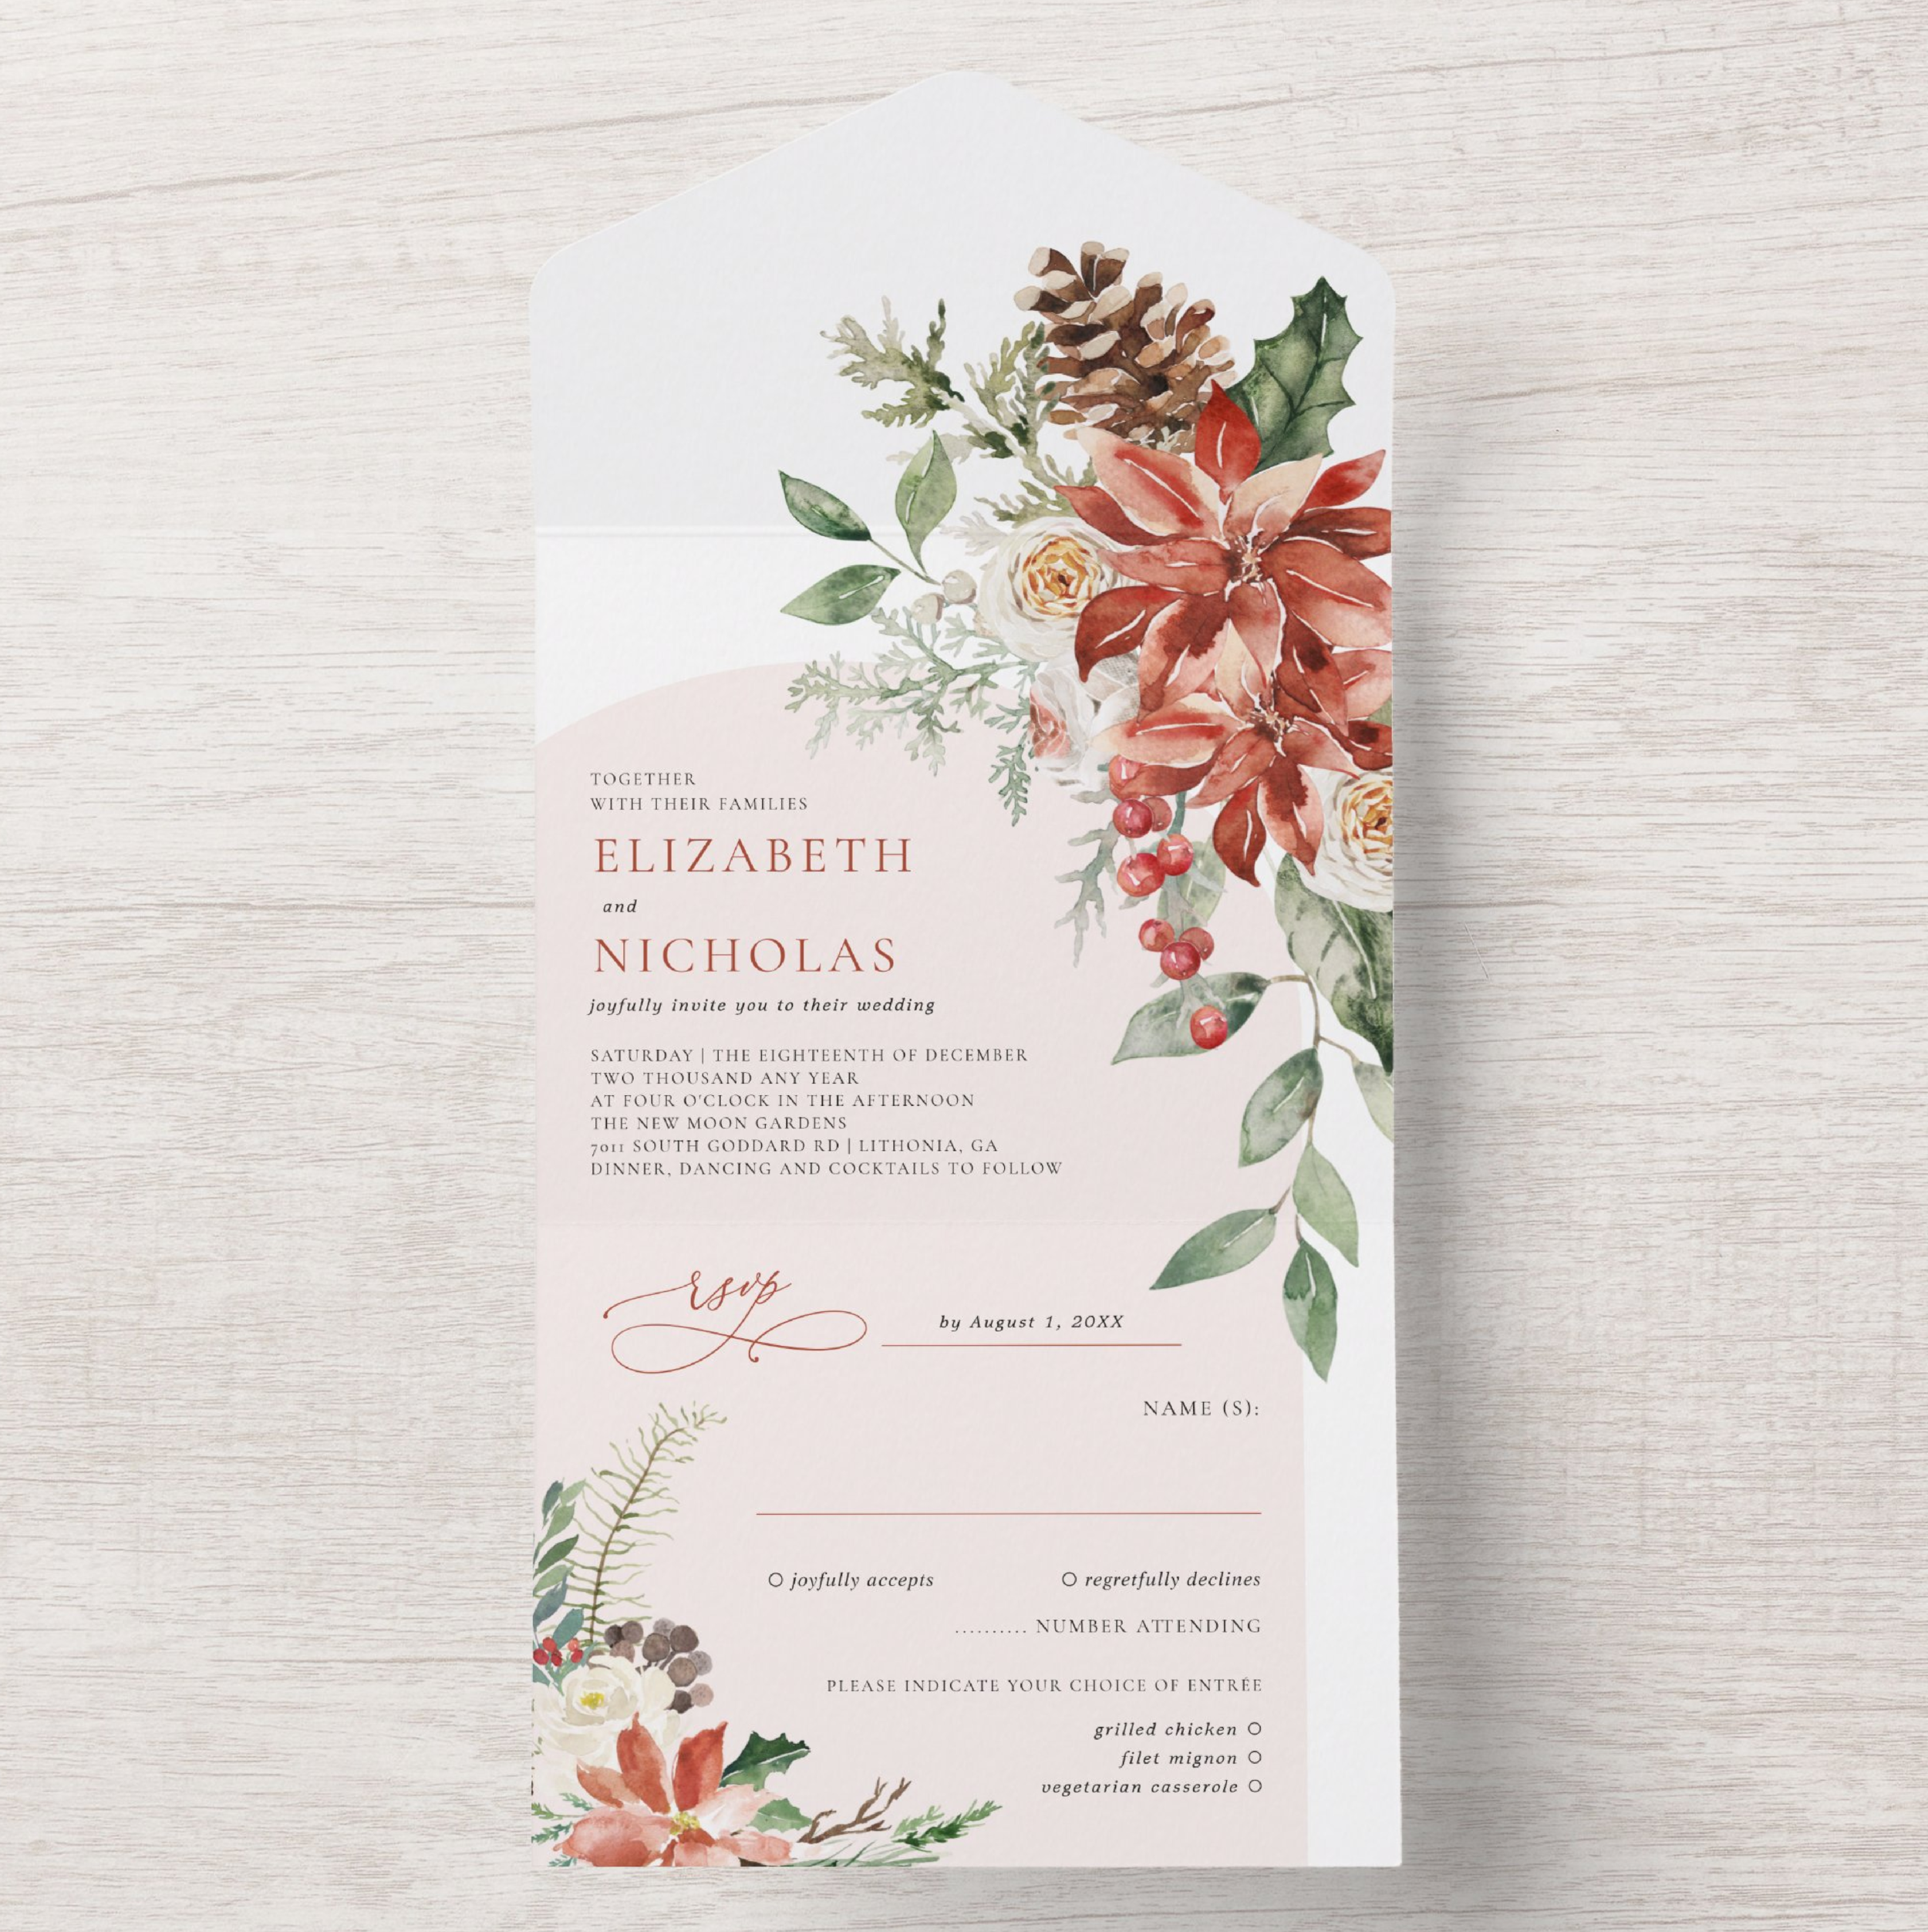 tis_the_season_christmas_wedding_floral_all_in_one_invitation-r3c447a070010465aa1bcc4a7fe497d9b_uunxy_1024.png